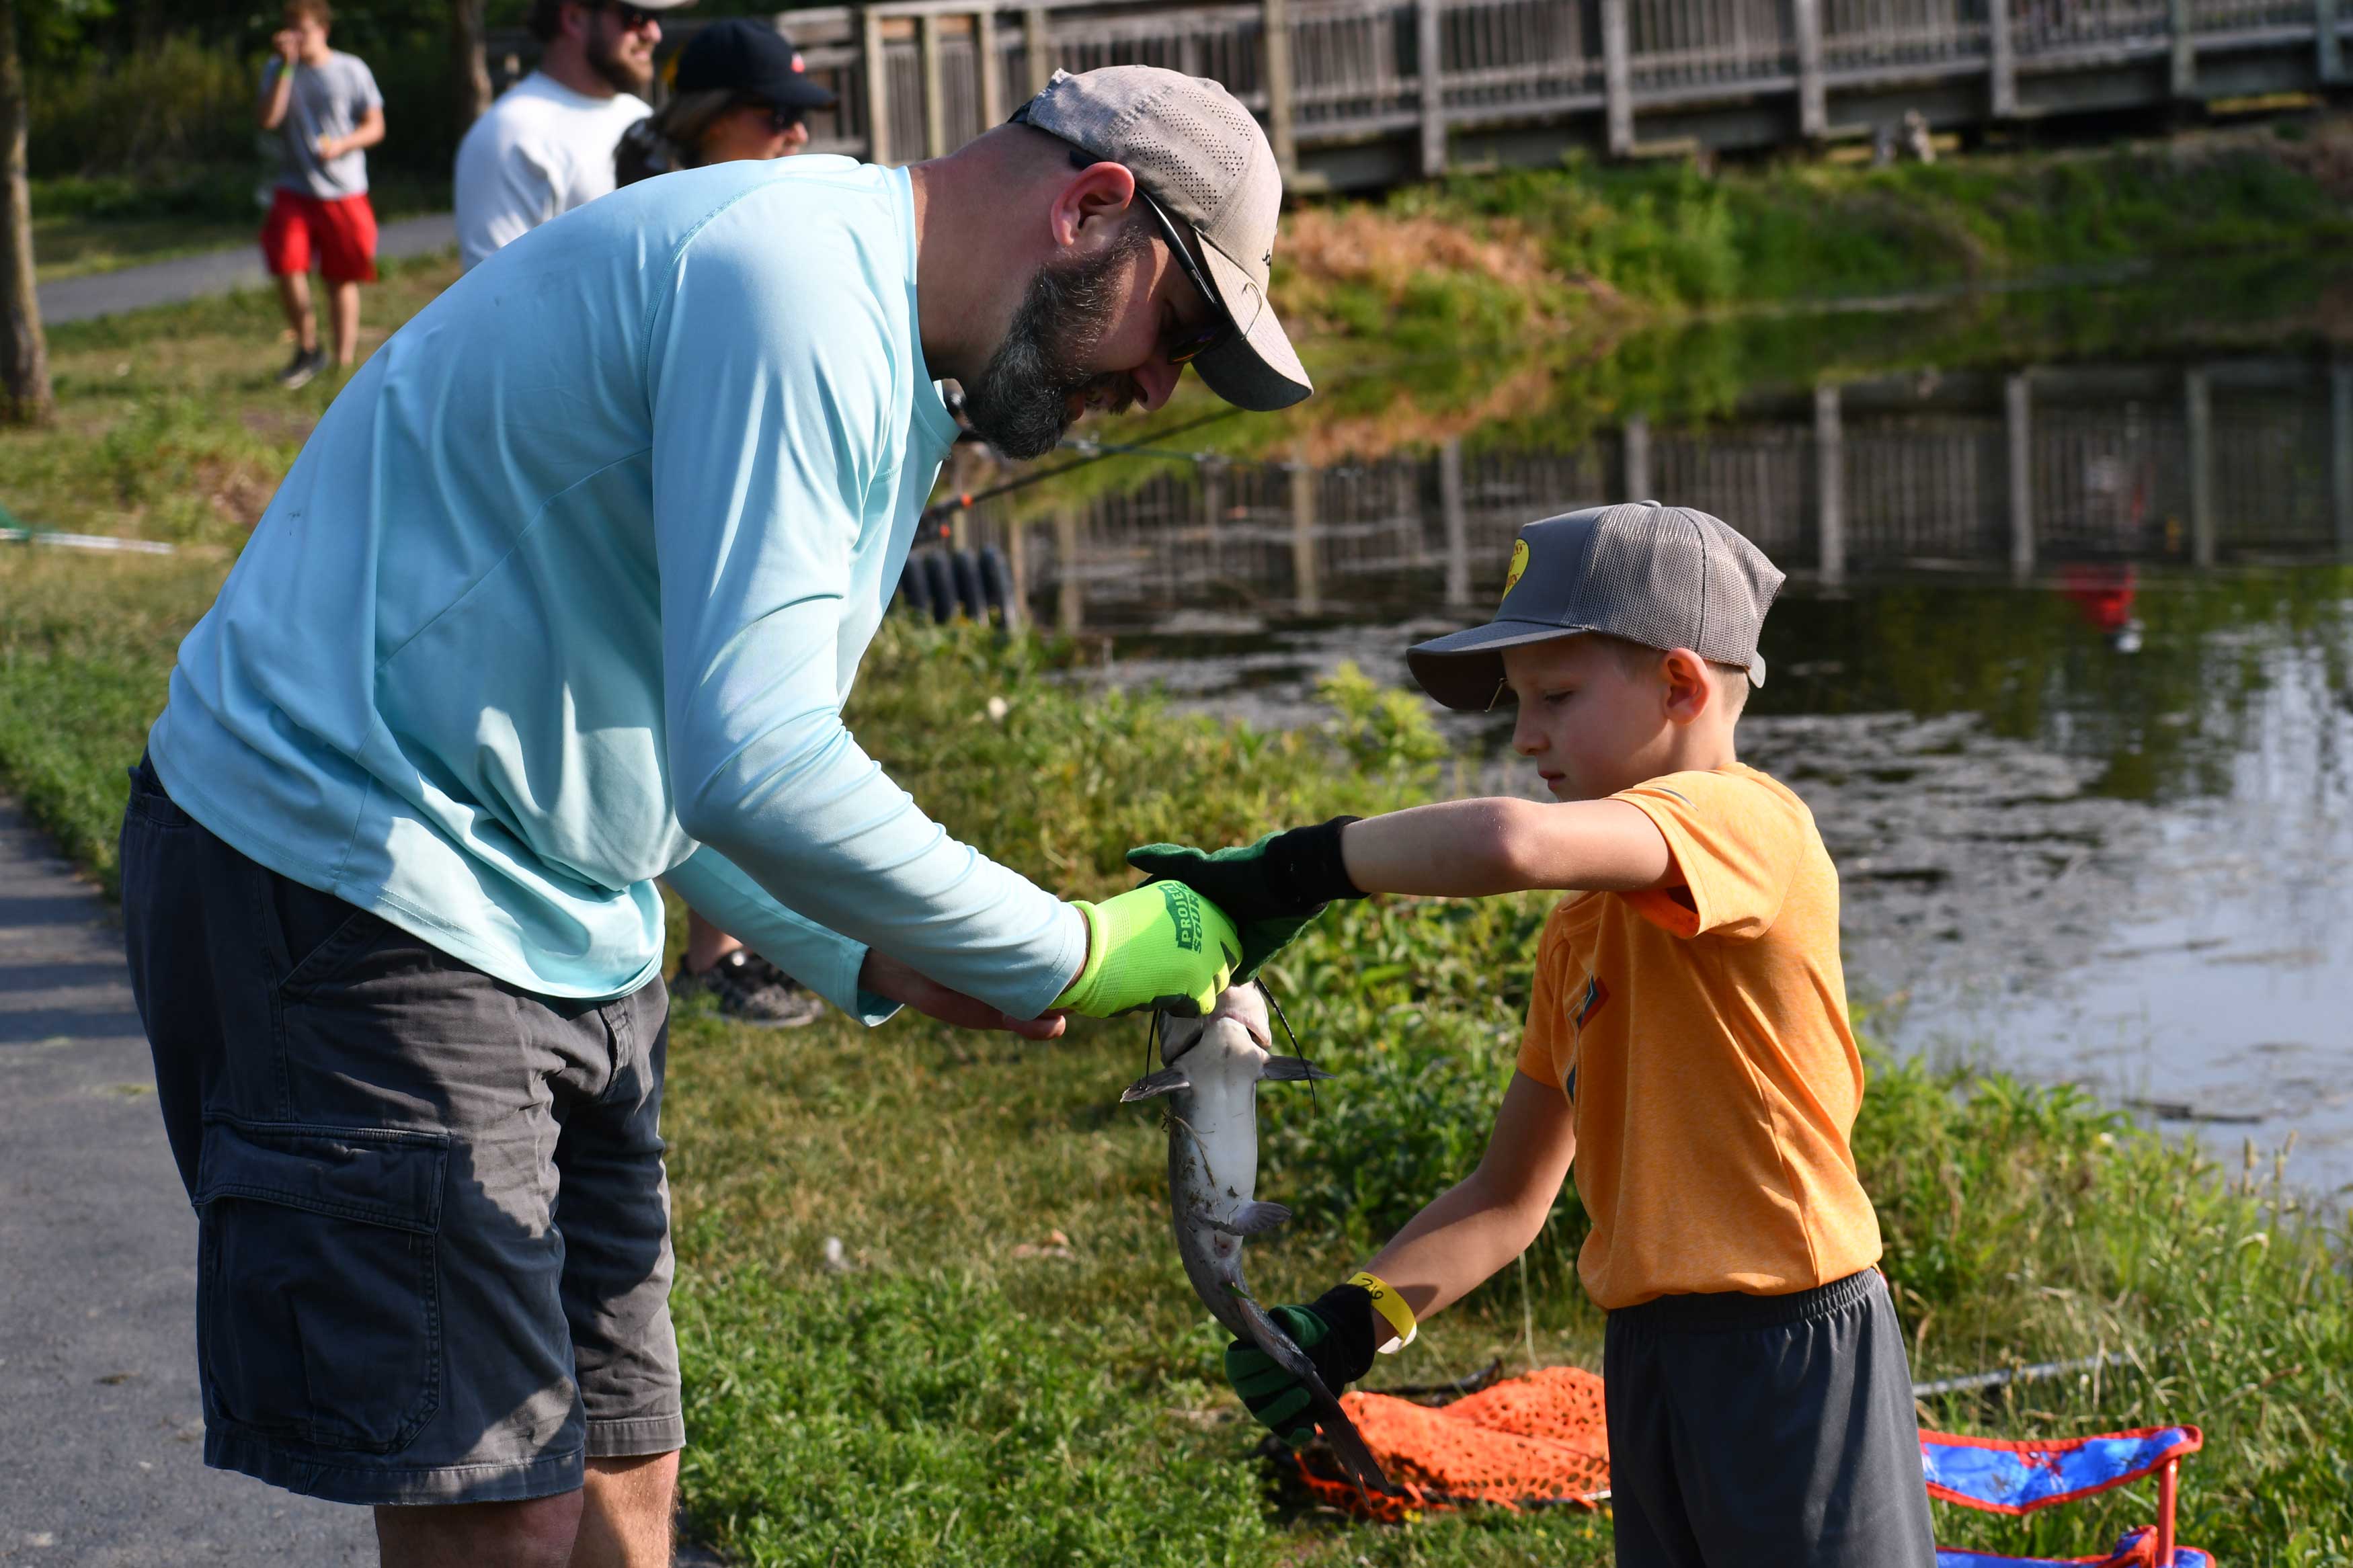 A man helps a young boy with a fish on the end of a line.